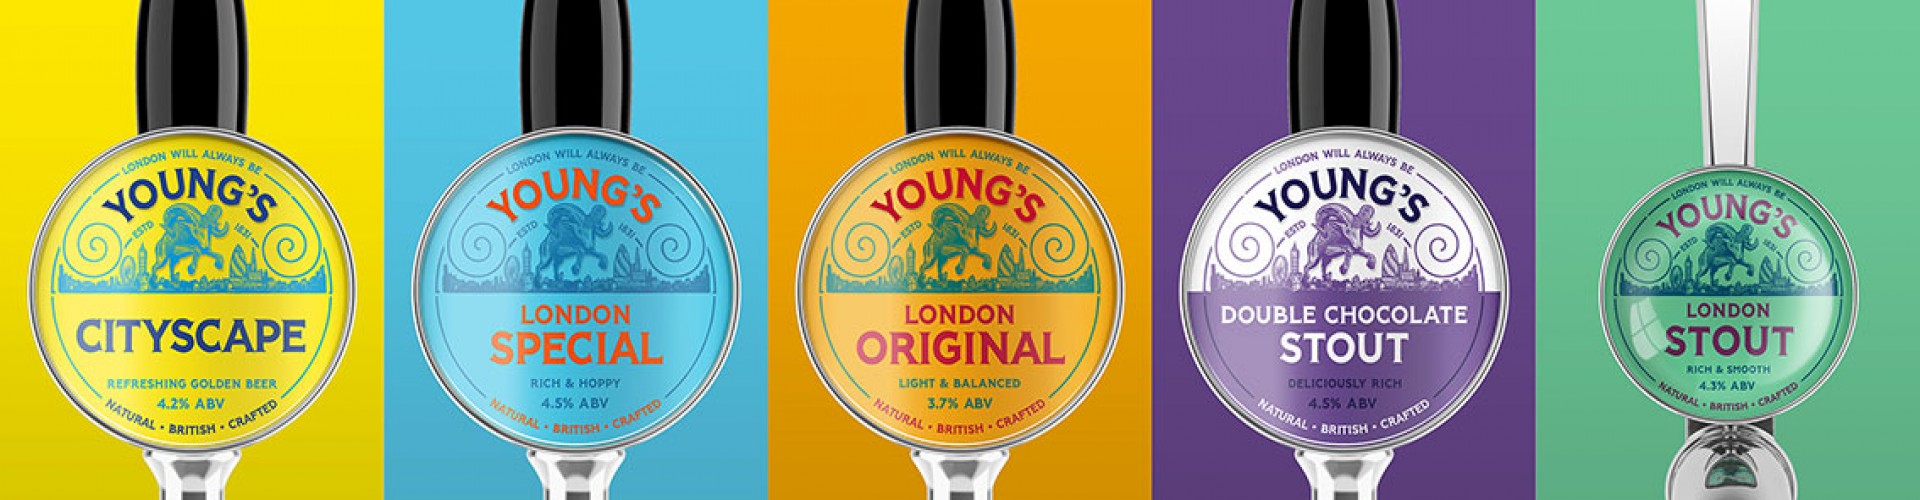 Youngs beer pumps|bear bottles with coloured background|hand drawn Youngs ram